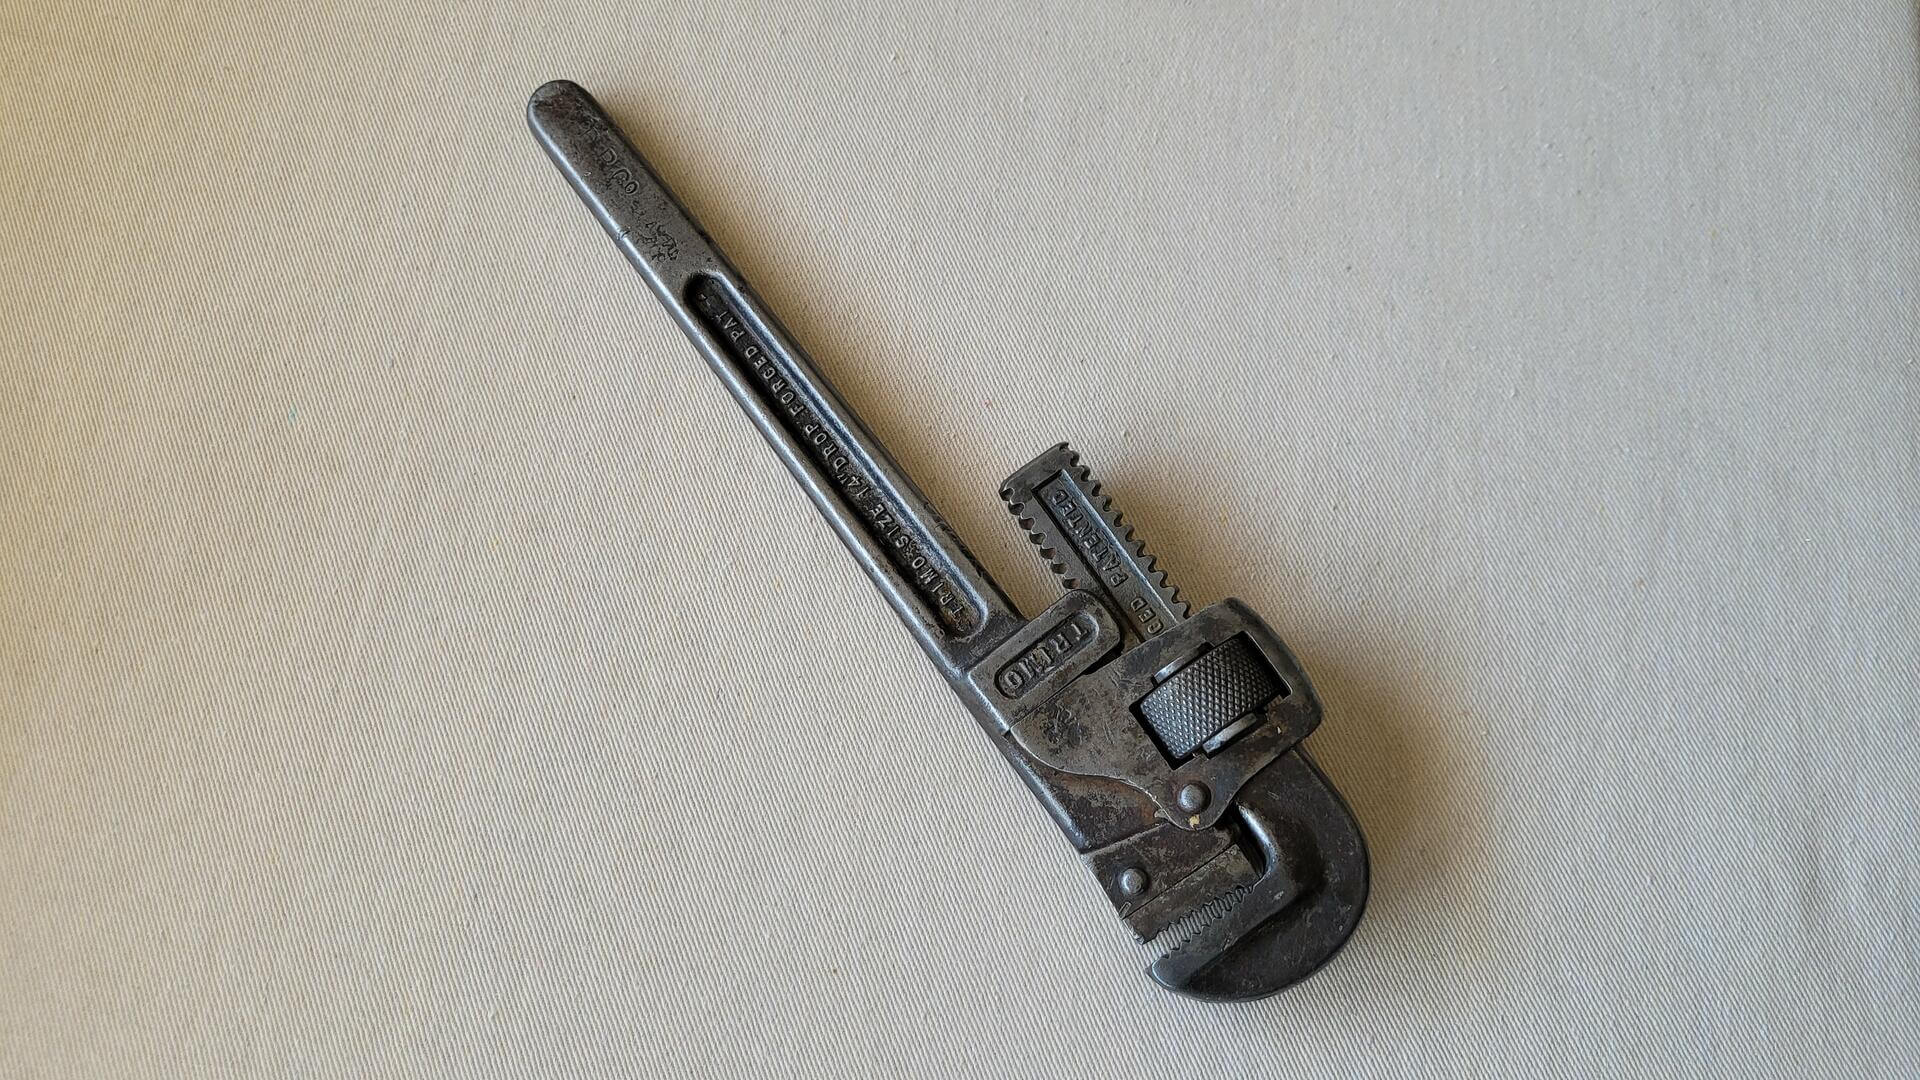 Vintage Trimo Stillson-pattern 14" adjustable pipe wrench by Trimont Mfg Co from Roxbury Mass. Antique made in USA collectible machinist and plumbing tools